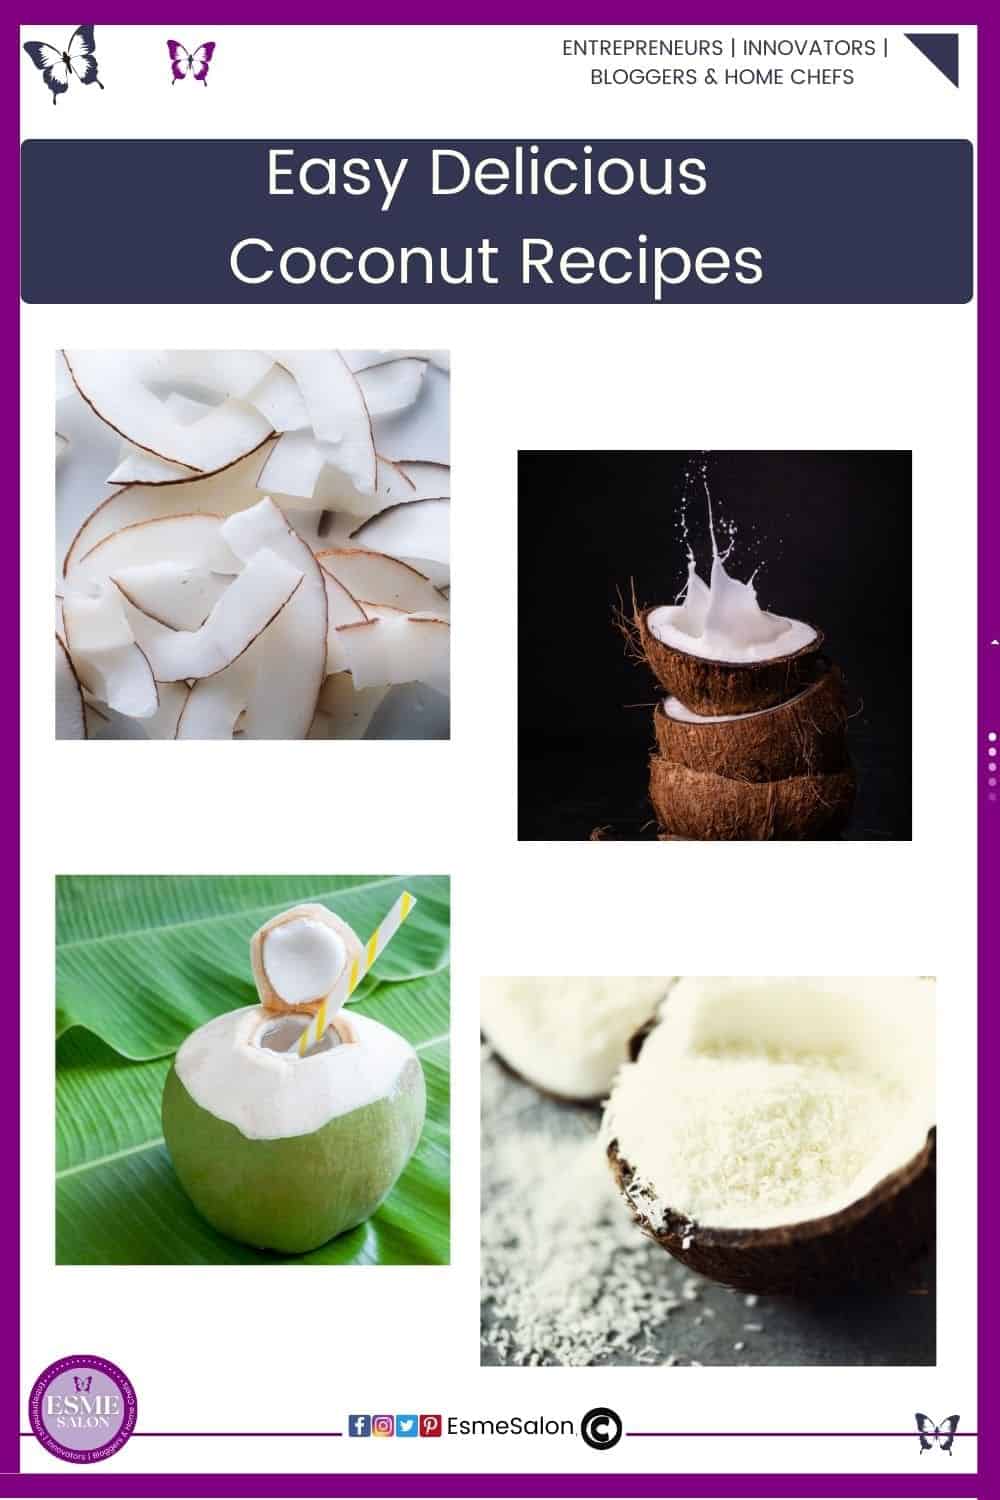 an image of shaved coconut, coconut milk, whole coconut with milk and a straw and fine coconut